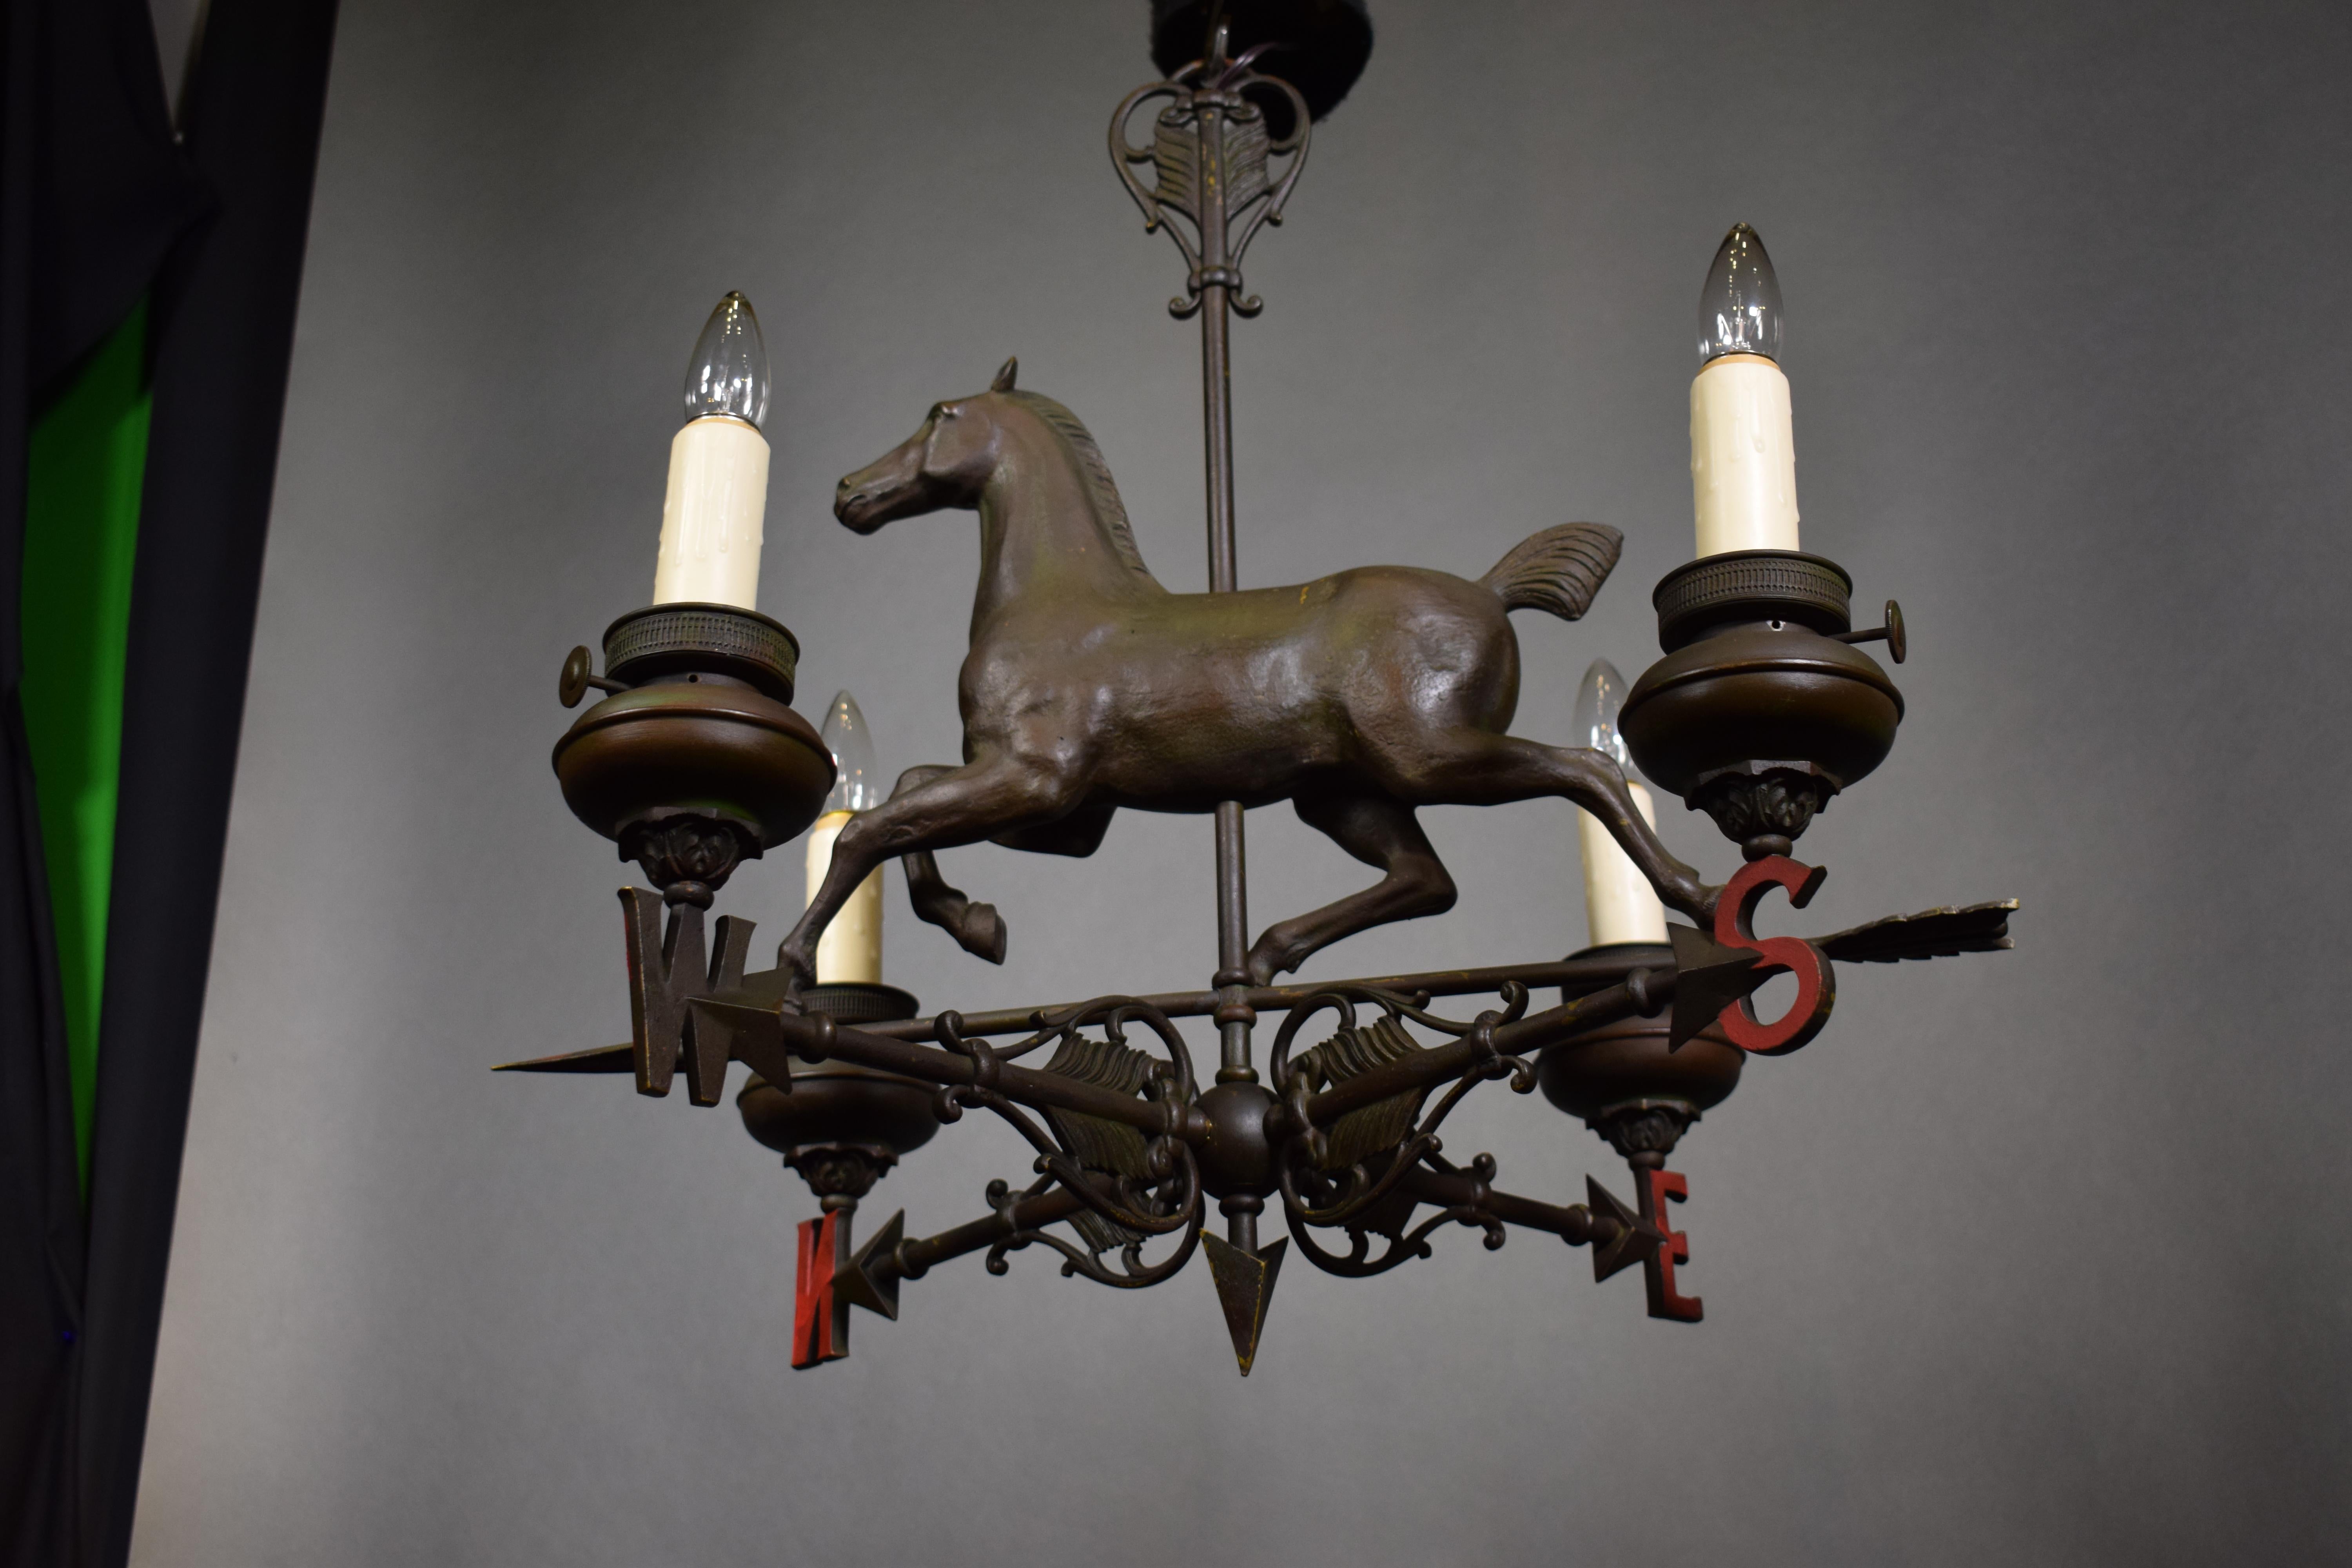 A fine and unusual all bronze chandelier depicting a Horse on weathervane. England, circa 1900. 4 Lights.
Dimensions: Height 25